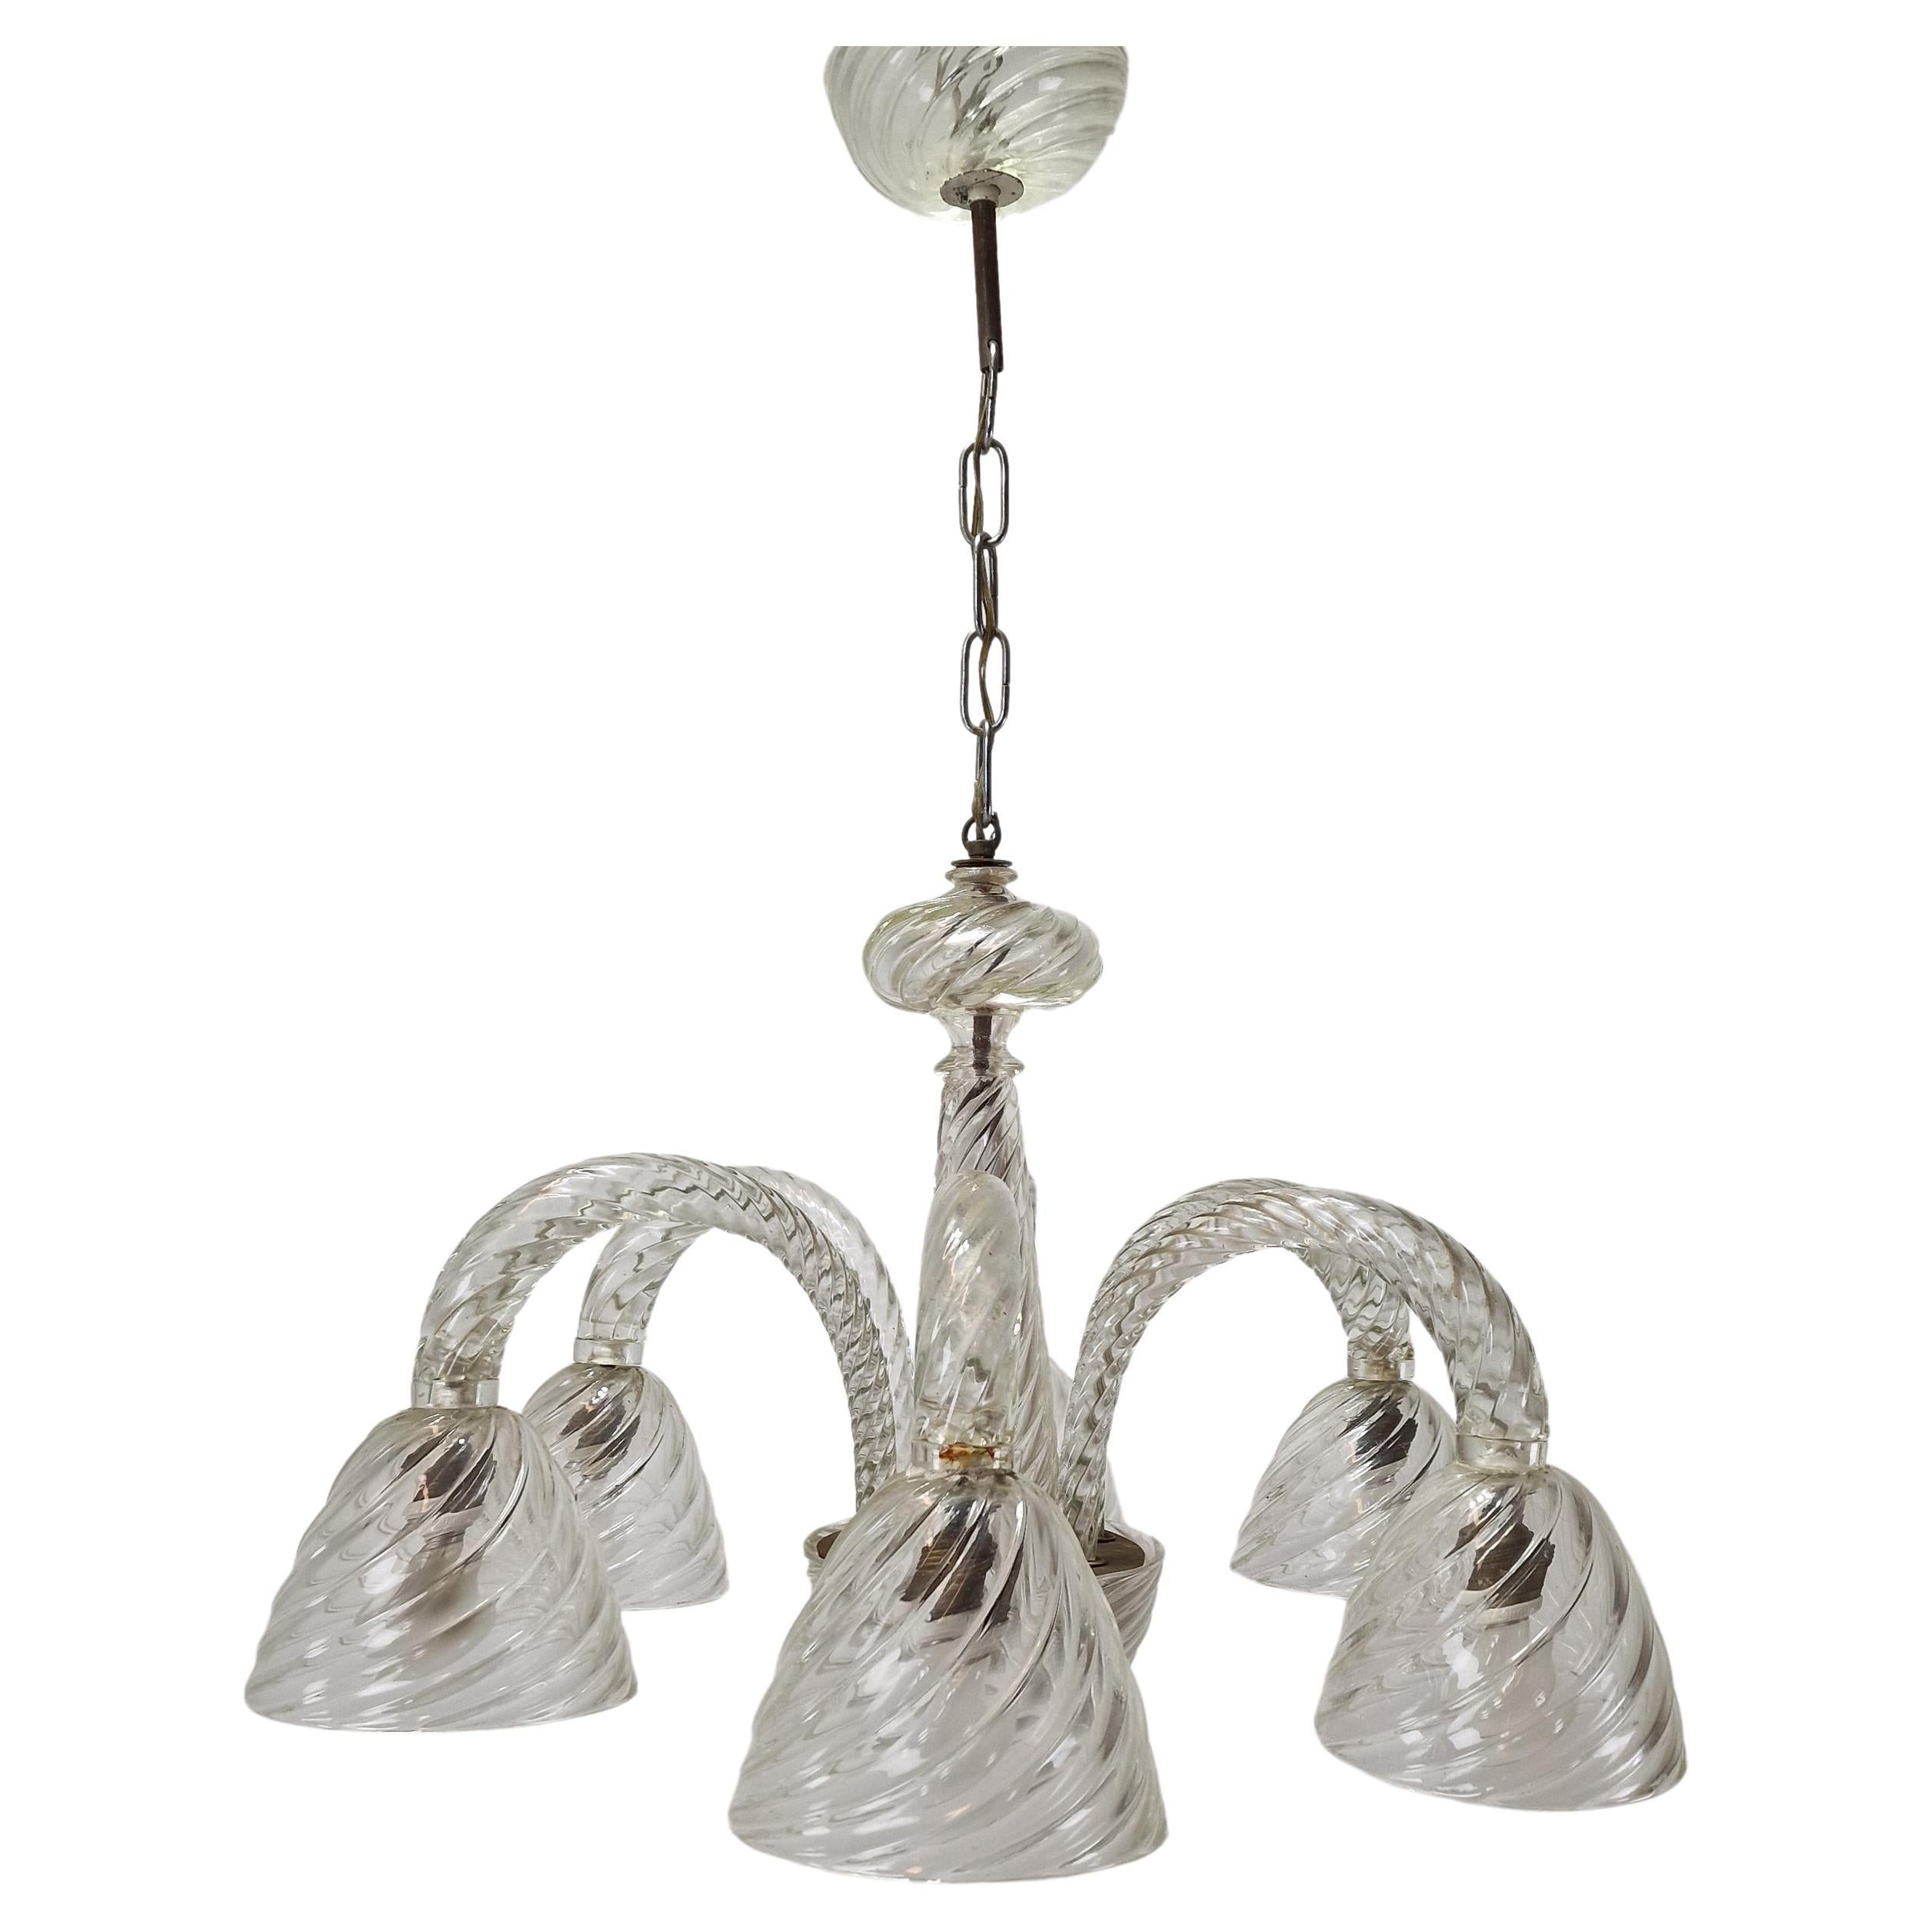 Barovier & Toso Murano Glass Chandelier, Italy 1950's For Sale